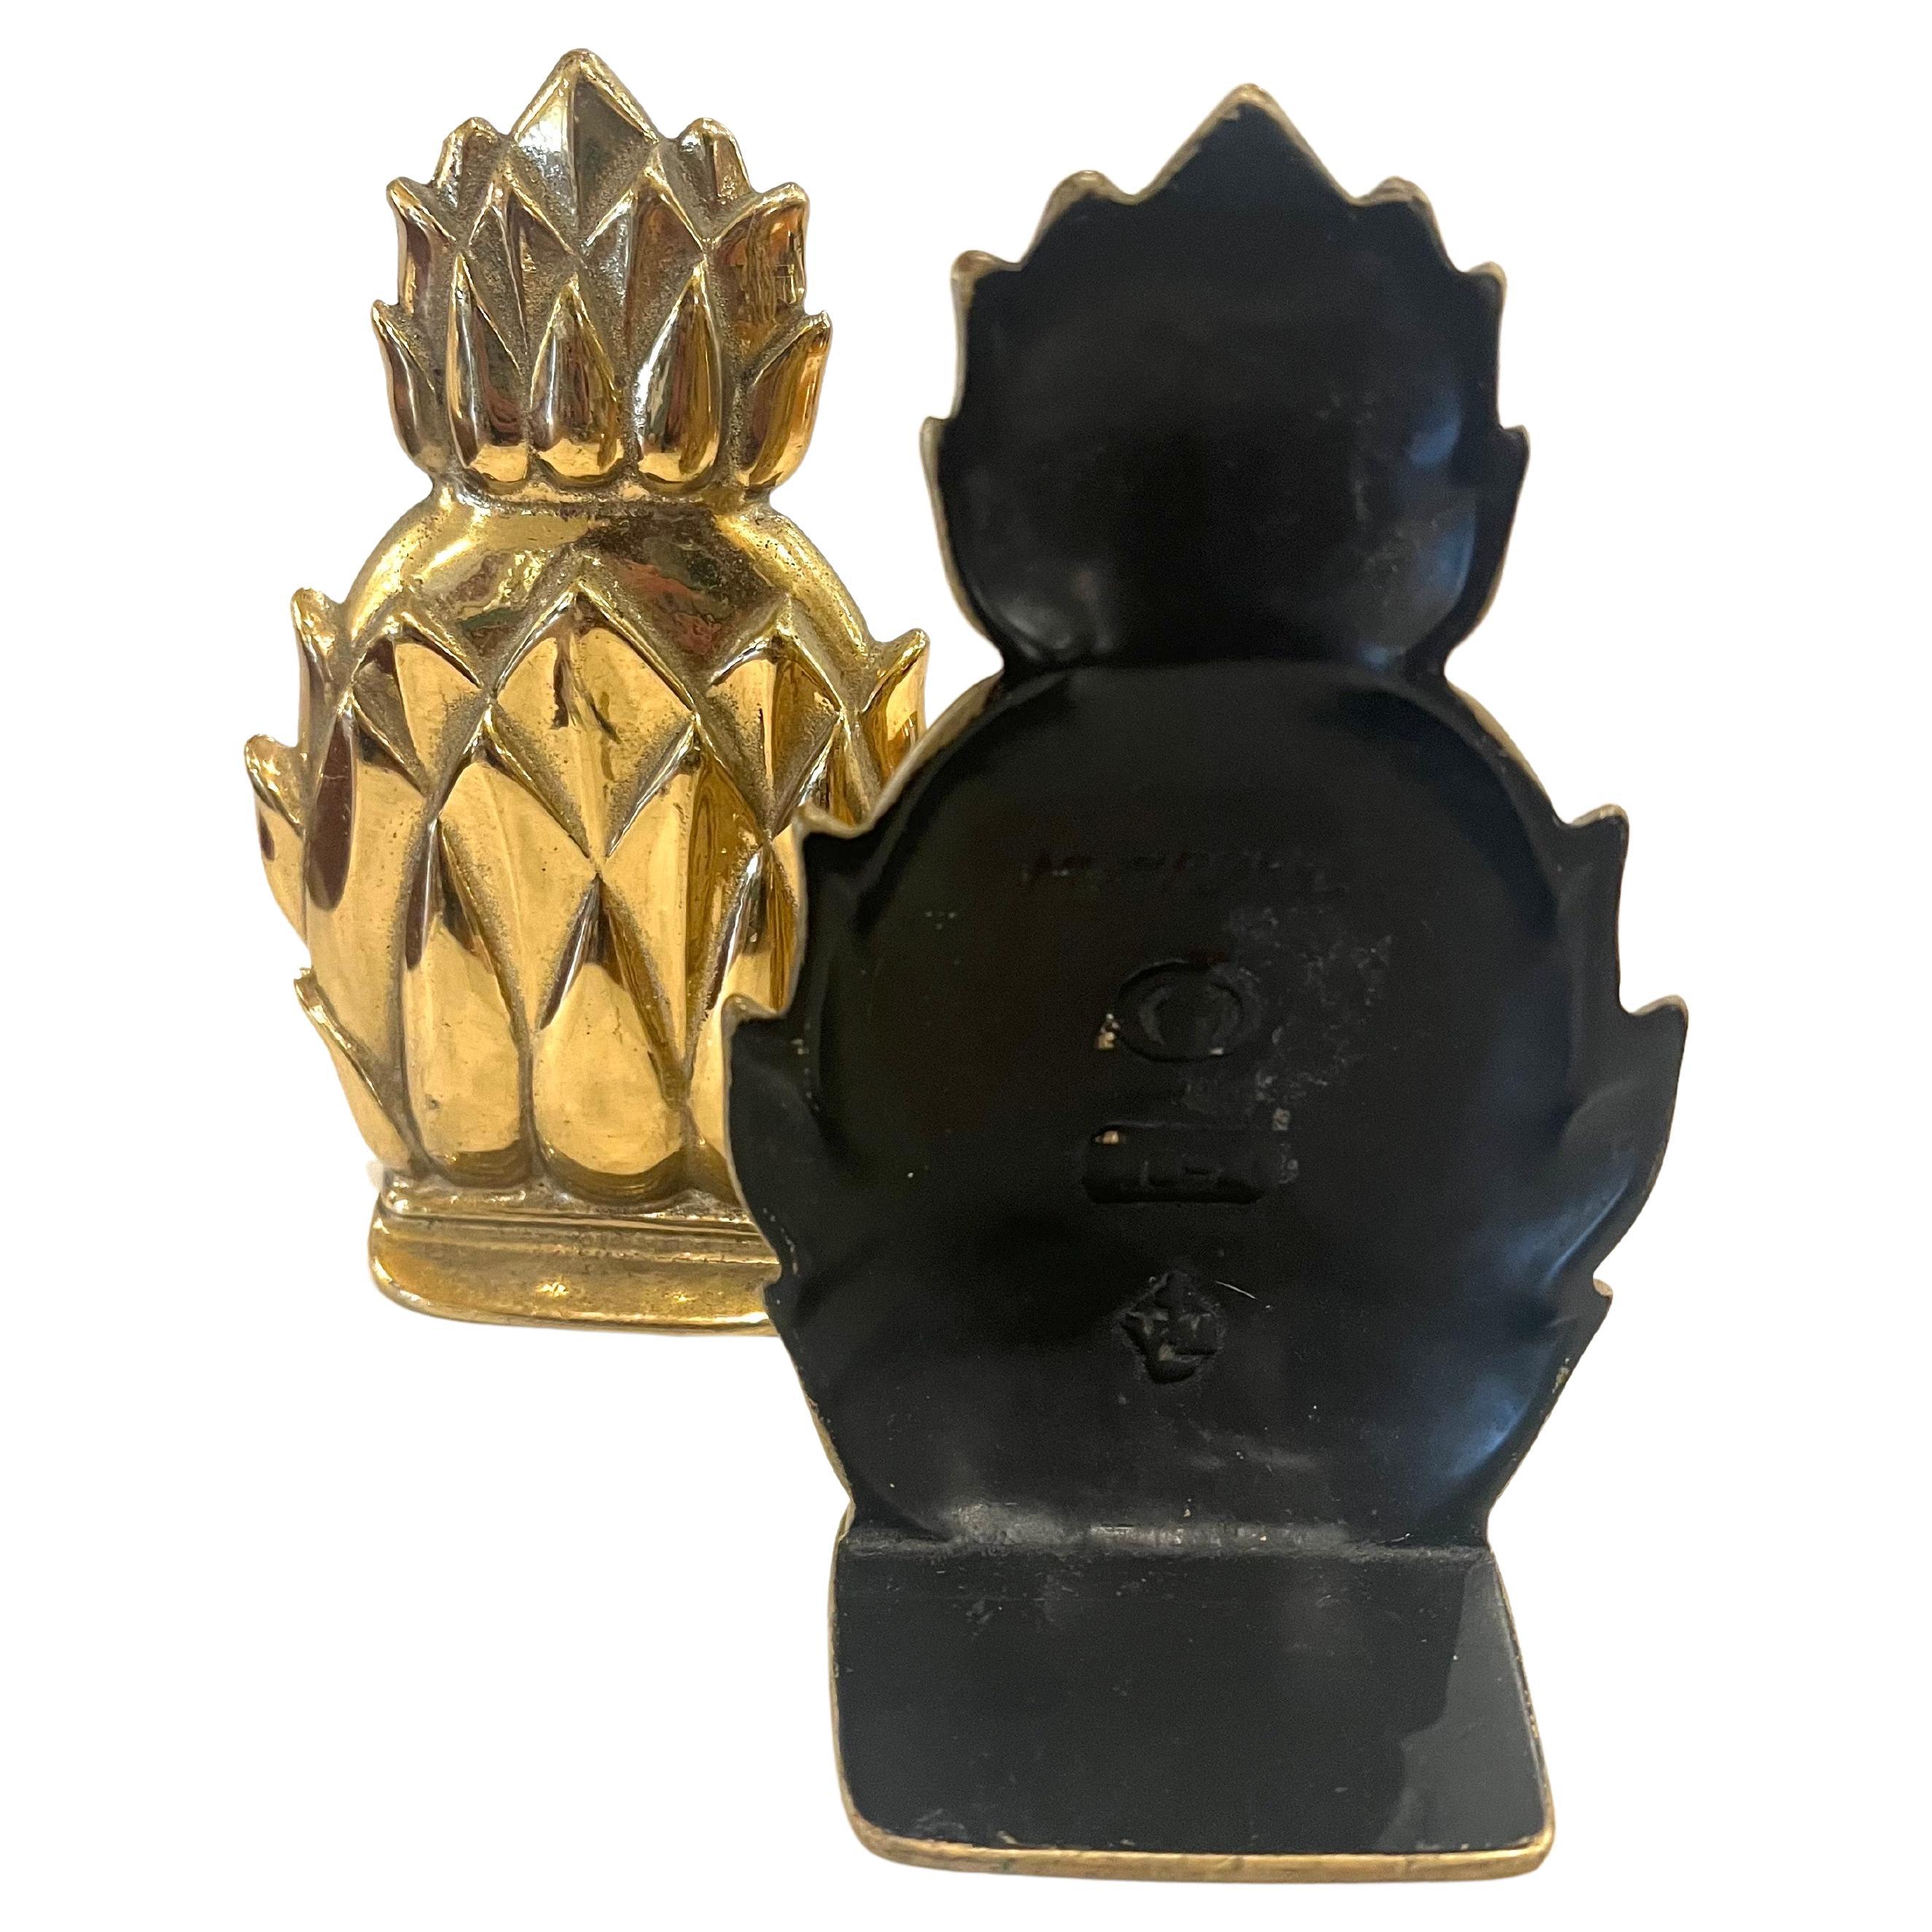 A very good looking pair of solid polished brass pineapple bookends, by Virginia Metalcrafters circa 1970s.